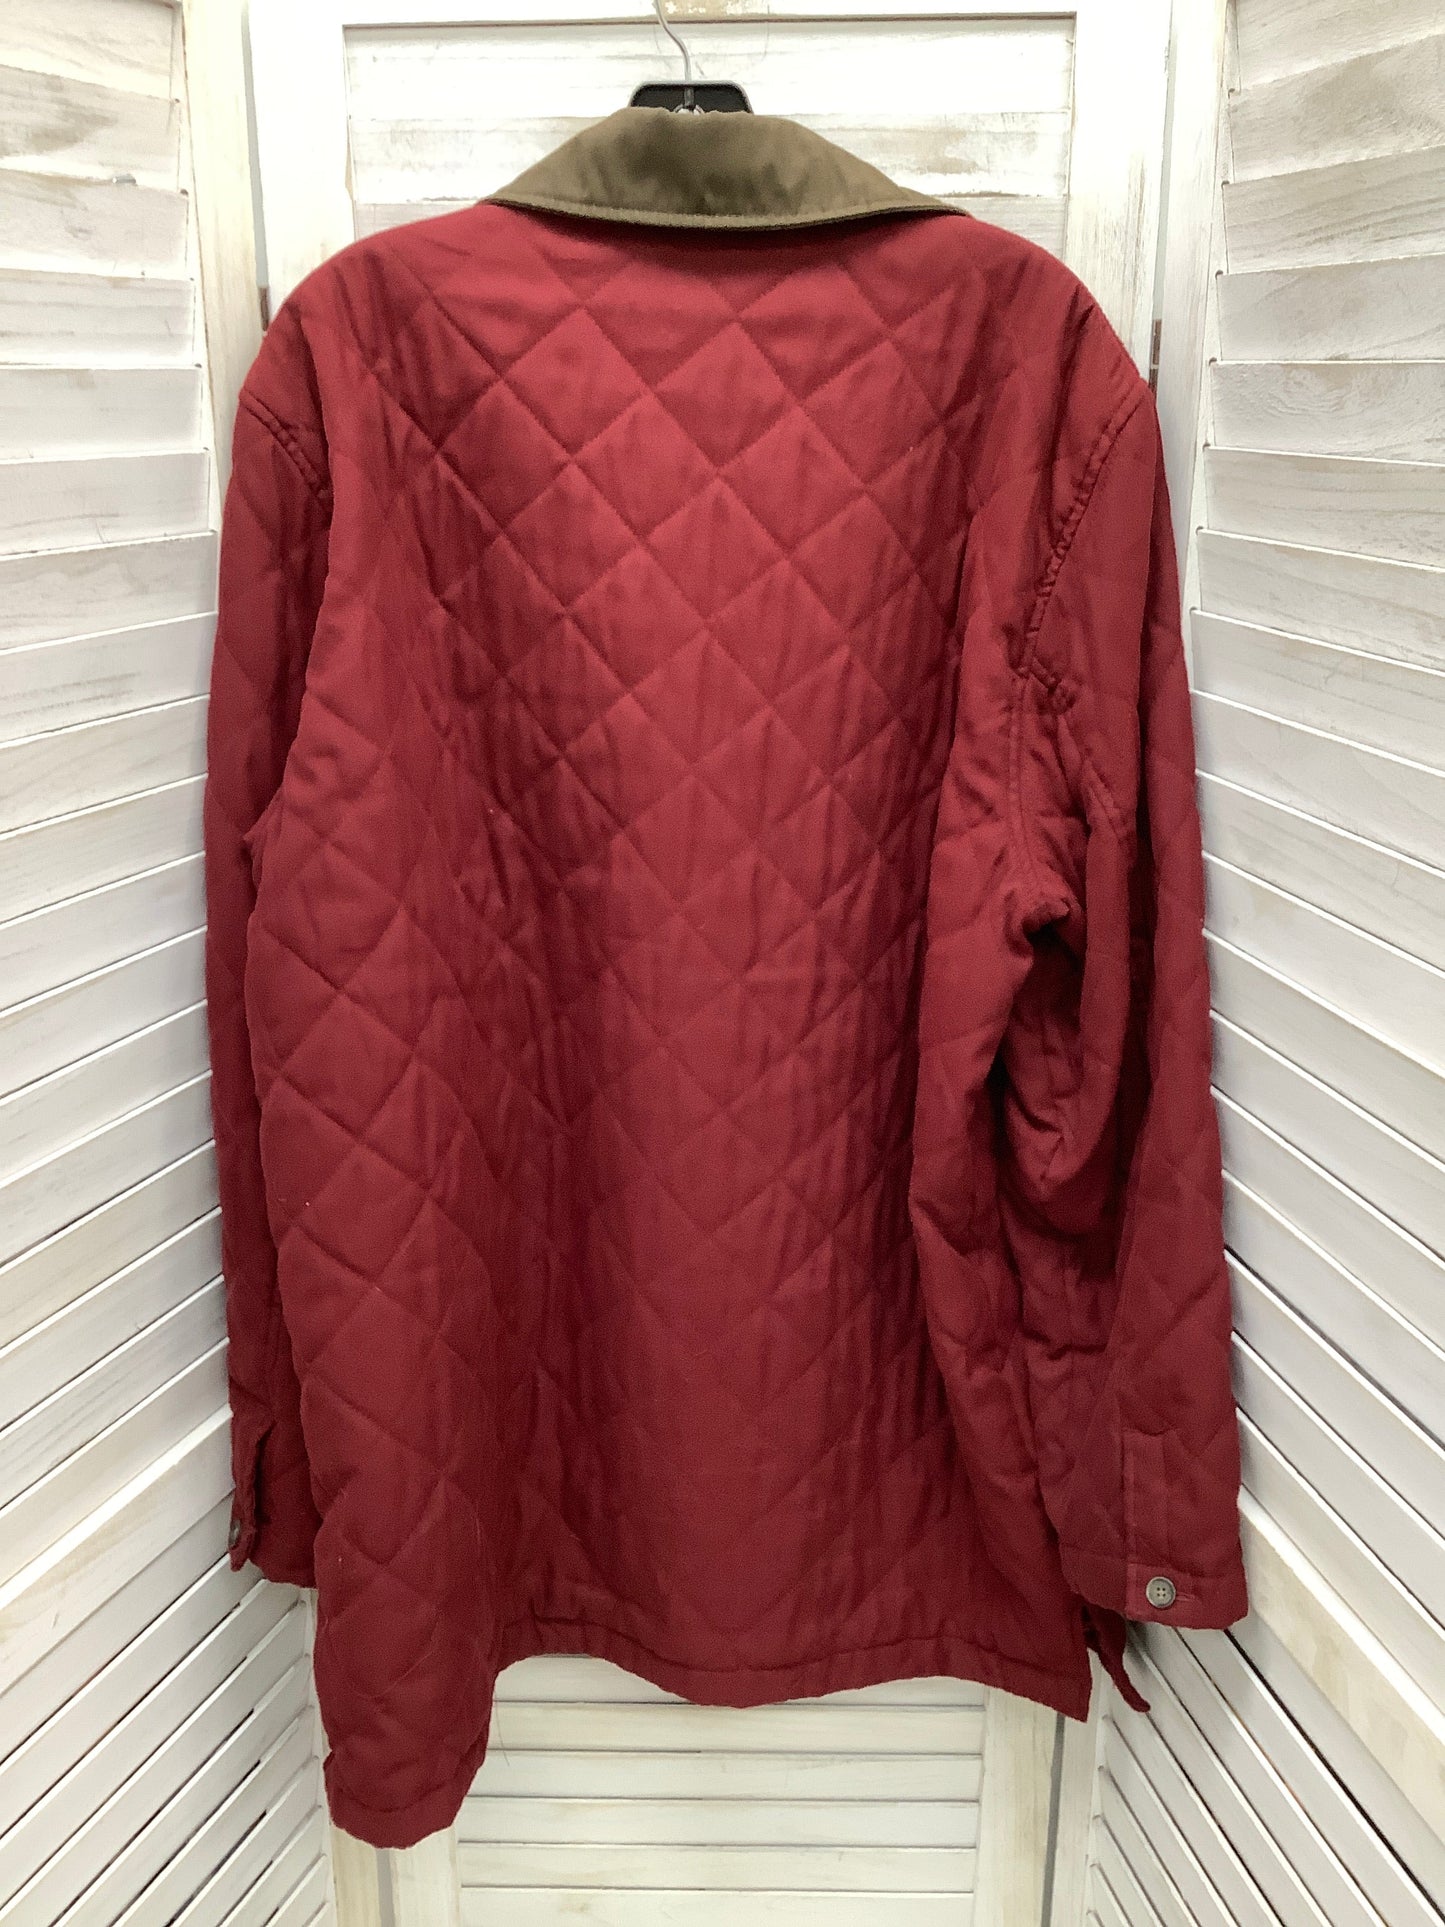 Coat Puffer & Quilted By Eddie Bauer  Size: Xl